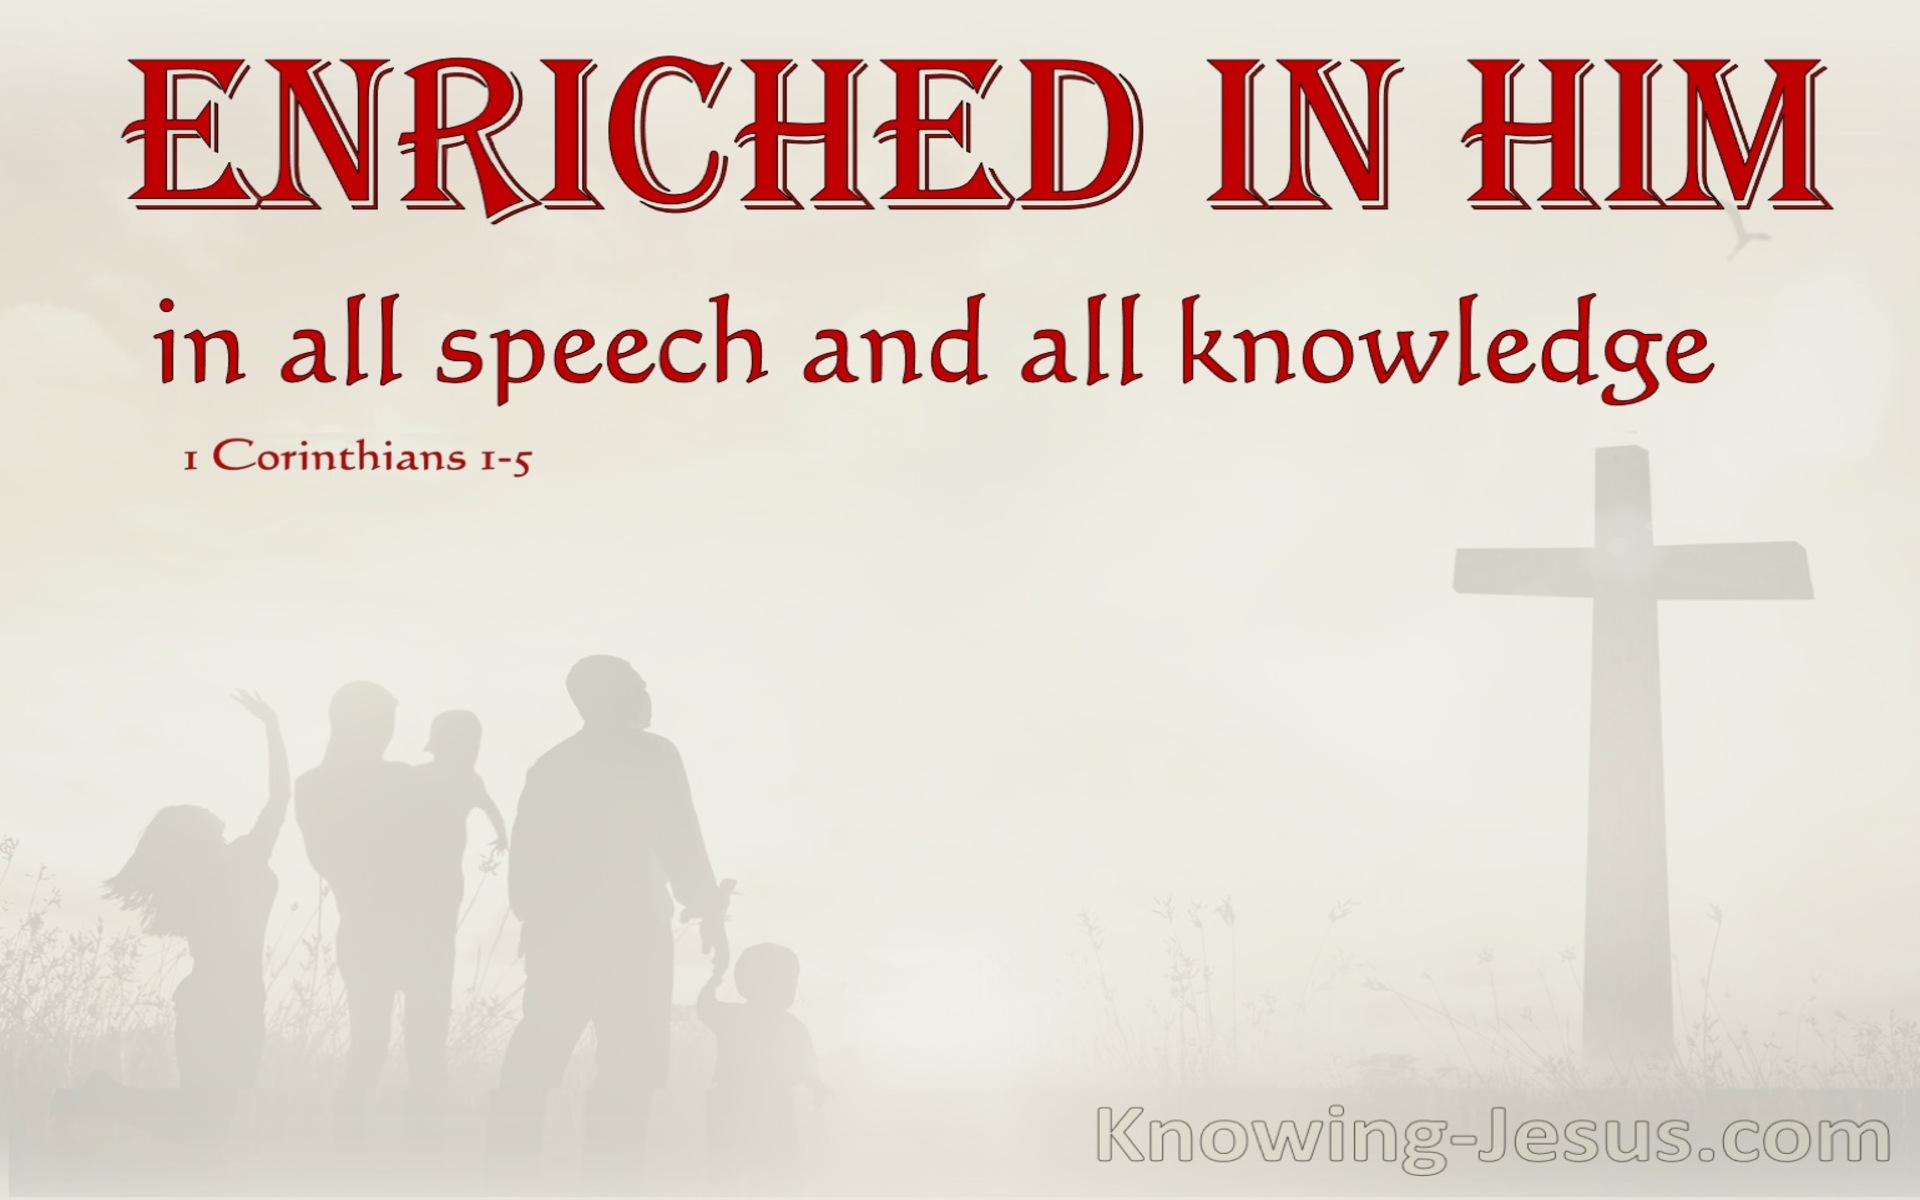 1 Corinthians 1:5 Enriched In Him (red)